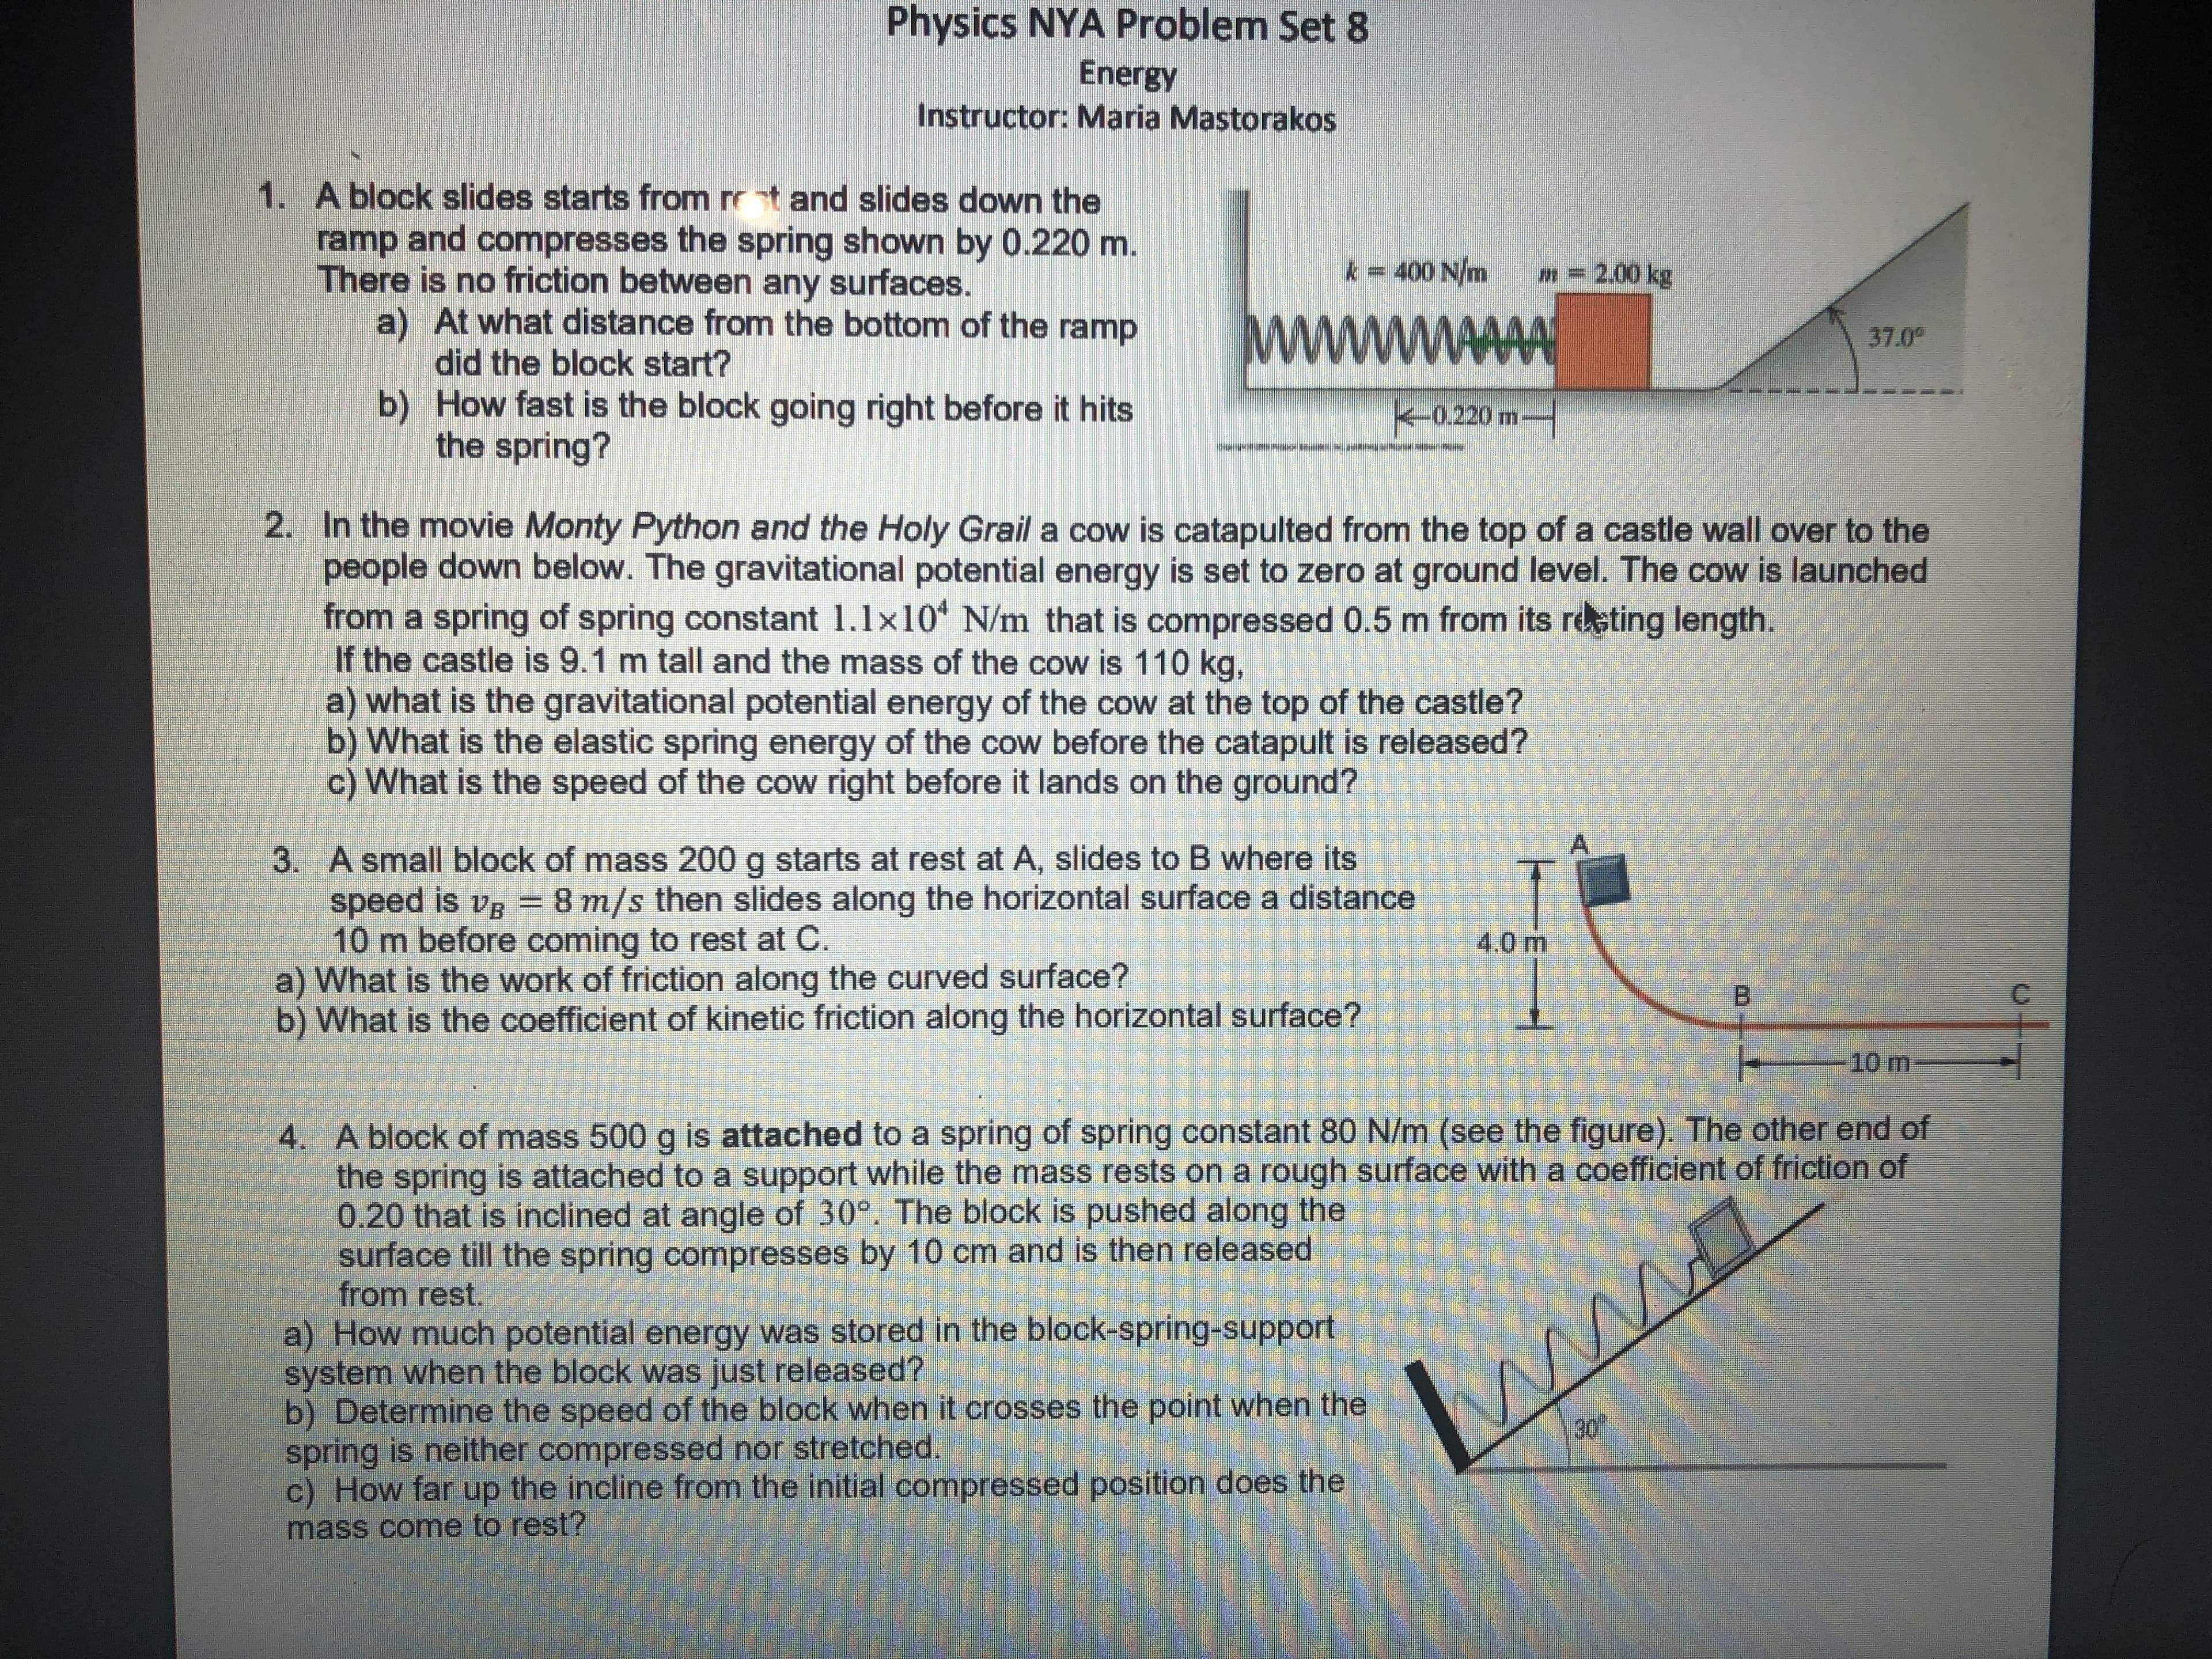 Physics NYA Problem Set 8
Energy
Instructor: Maria Mastorakos
1. A block slides starts from rr t and slides down the
ramp and compresses the spring shown by 0.220 m.
There is no friction between any surfaces.
a) At what distance from the bottom of the ramp
did the block start?
b) How fast is the block going right before it hits
the spring?
k400 N/m
m- 200 kg
37.0
k-0.220 m-
2. In the movie Monty Python and the Holy Grail a cow is catapulted from the top of a castle wall over to the
people down below. The gravitational potential energy is set to zero at ground level. The cow is launched
from a spring of spring constant 1.1x10 N/m that is compressed 0.5 m from its re ting length.
If the castle is 9.1 m tall and the mass of the cow is 110 kg,
a) what is the gravitational potential energy of the cow at the top of the castle?
b) What is the elastic spring energy of the cow before the catapult is released?
c) What is the speed of the cow right before it lands on the ground?
A
3. A small block of mass 200 g starts at rest at A, slides to B where its
speed is ve = 8 m/s then slides along the horizontal surface a distance
10 m before coming to rest at C.
a) What is the work of friction along the curved surface?
b) What is the coefficient of kinetic friction along the horizontal surface?
4.0 m
B
10 m
4. A block of mass 500g is attached to a spring of spring constant 80 N/m (see the figure). The other end of
the spring is attached to a support while the mass rests on a rough surface with a coefficient of friction of
0.20 that is inclined at angle of 30°. The block is pushed along the
surface till the spring compresses by 10 cm and is then released
from rest.
a) How much potential energy was stored in the block-spring-support
system when the block was just released?
b) Determine the speed of the block when it crosses the point when the
spring is neither compressed nor stretched.
c) How far up the incline from the initial compressed position does the
mass come to rest?
www
30
